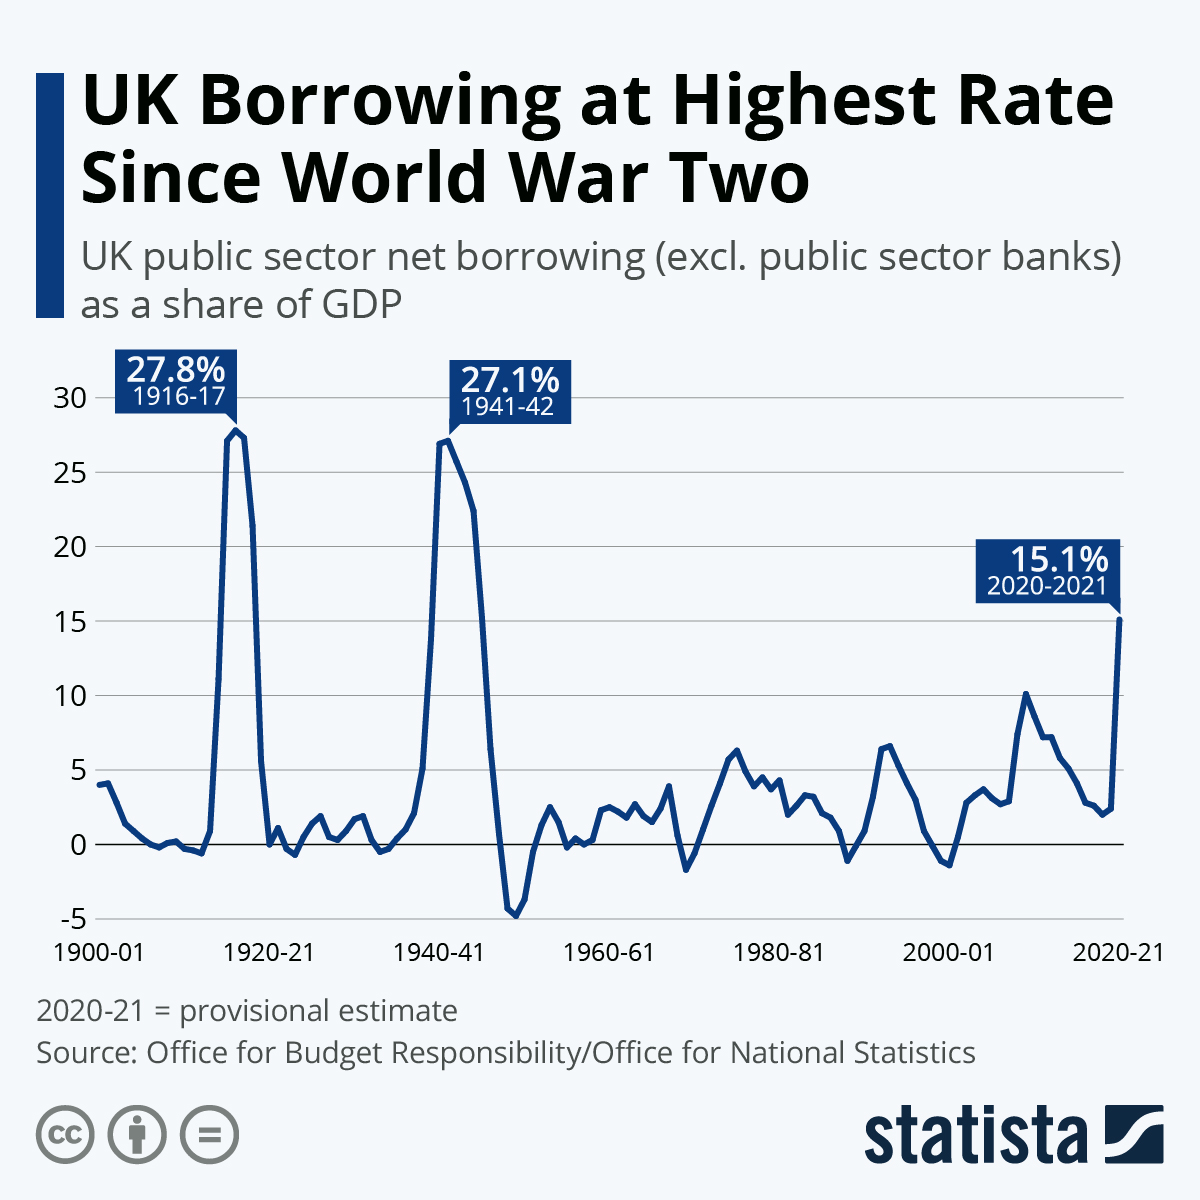 UK borrowing at highest rate since the Second World War